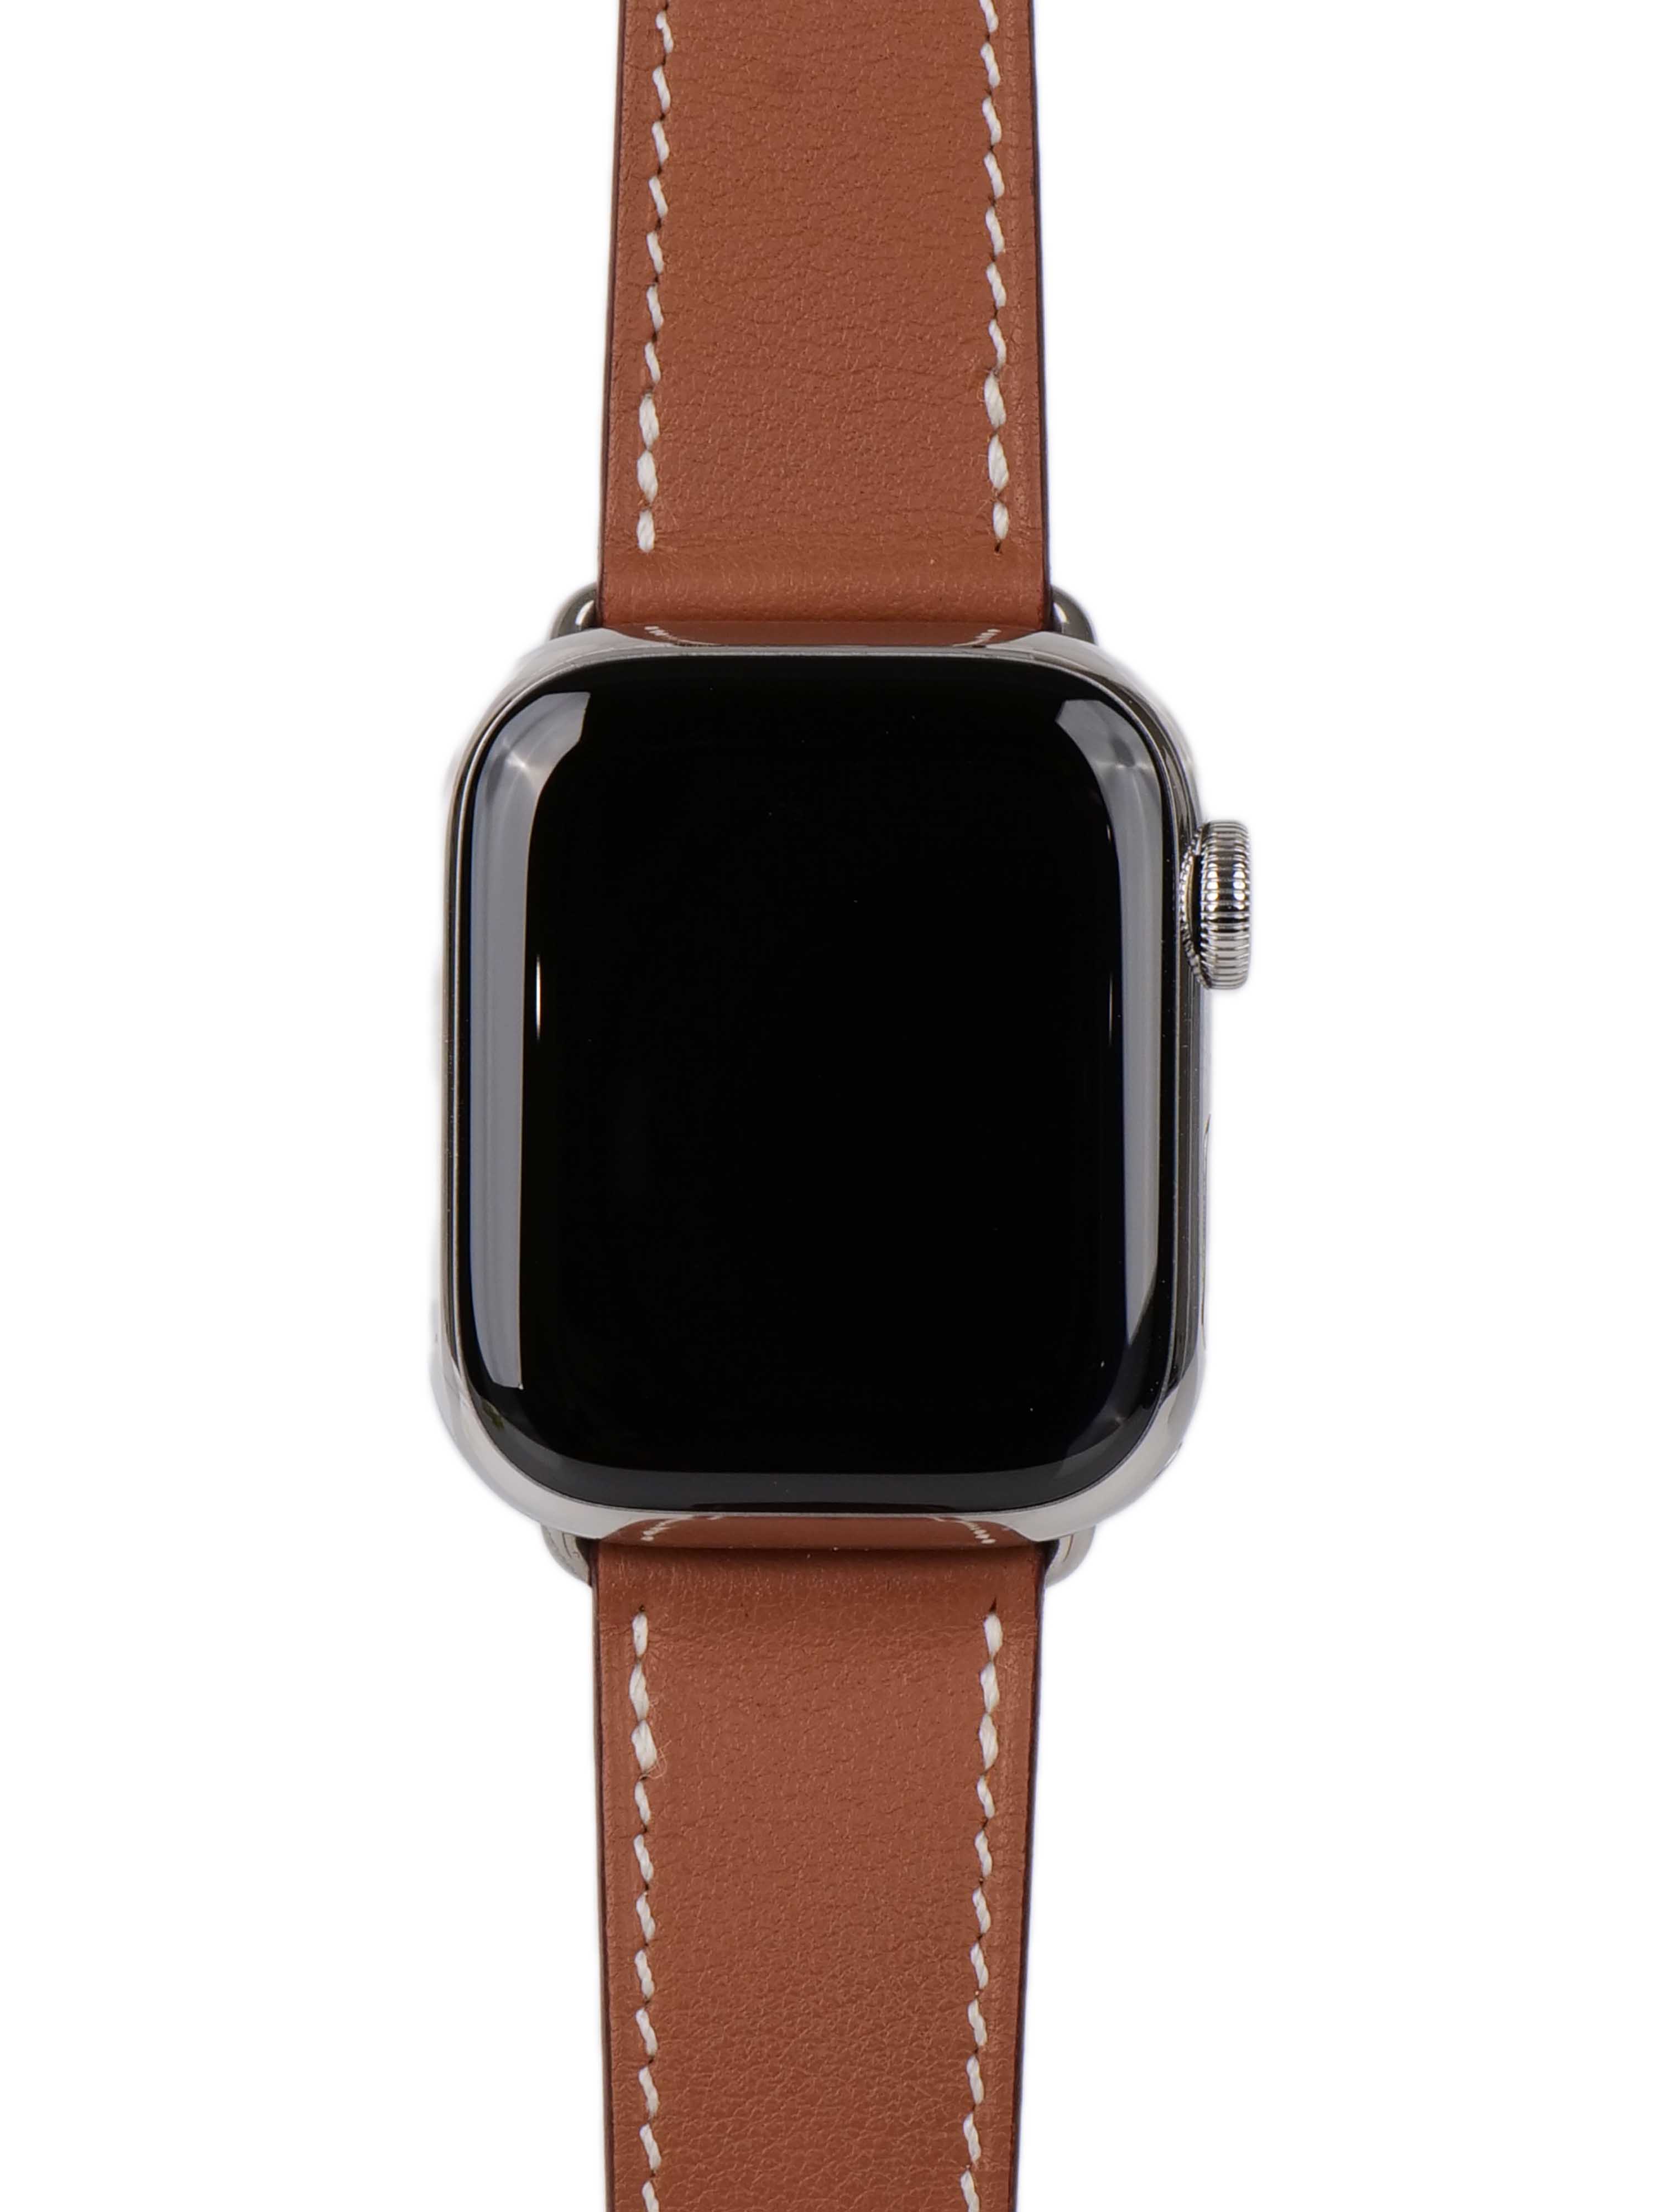 Hermes 9 Case & Band Apple Watch 41mm.